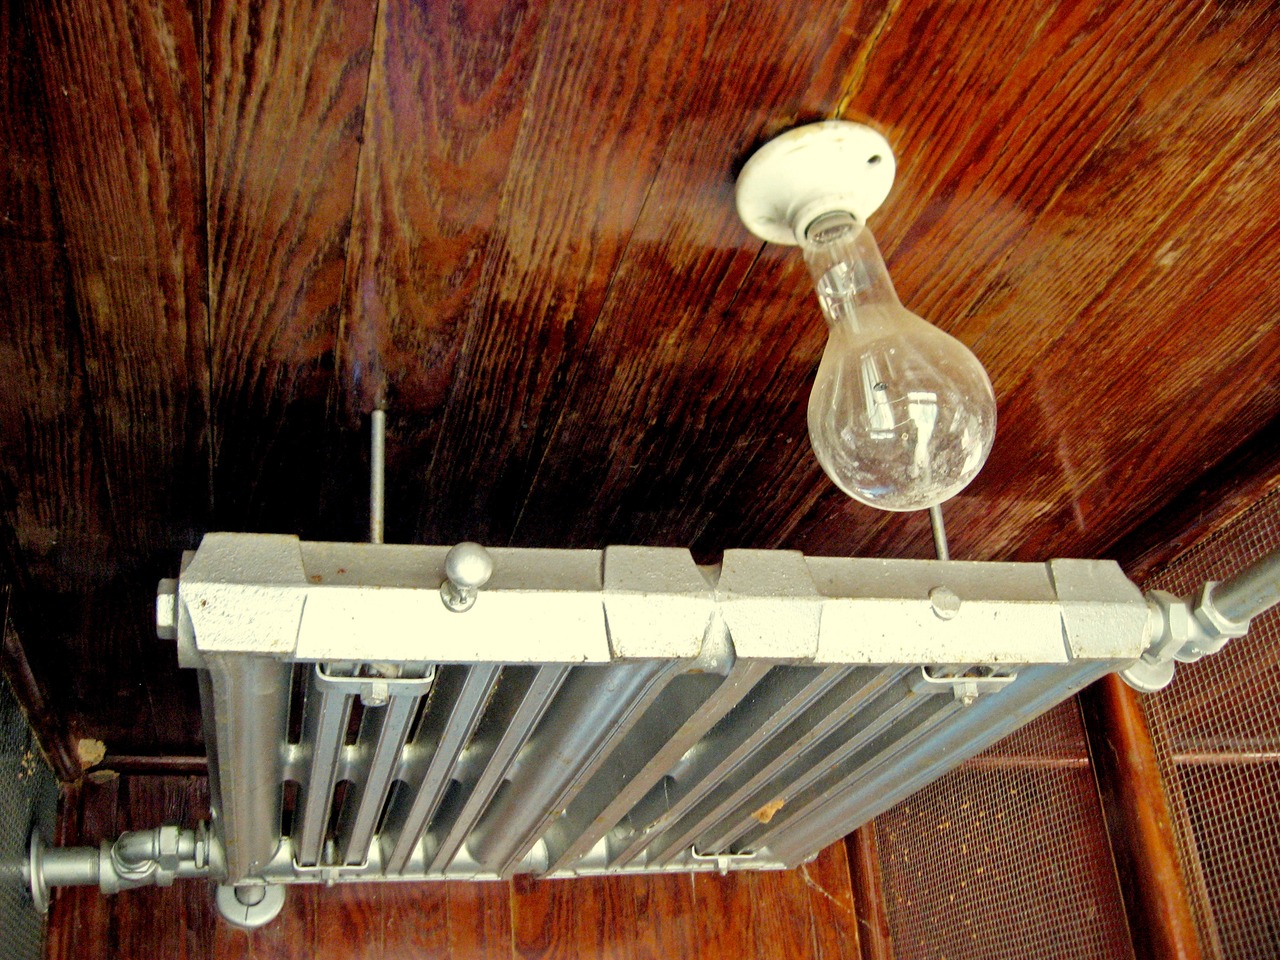 Ceiling mounted radiator and light bulb inside the Dog Hospital (1929) at Pebble Hill Plantation.